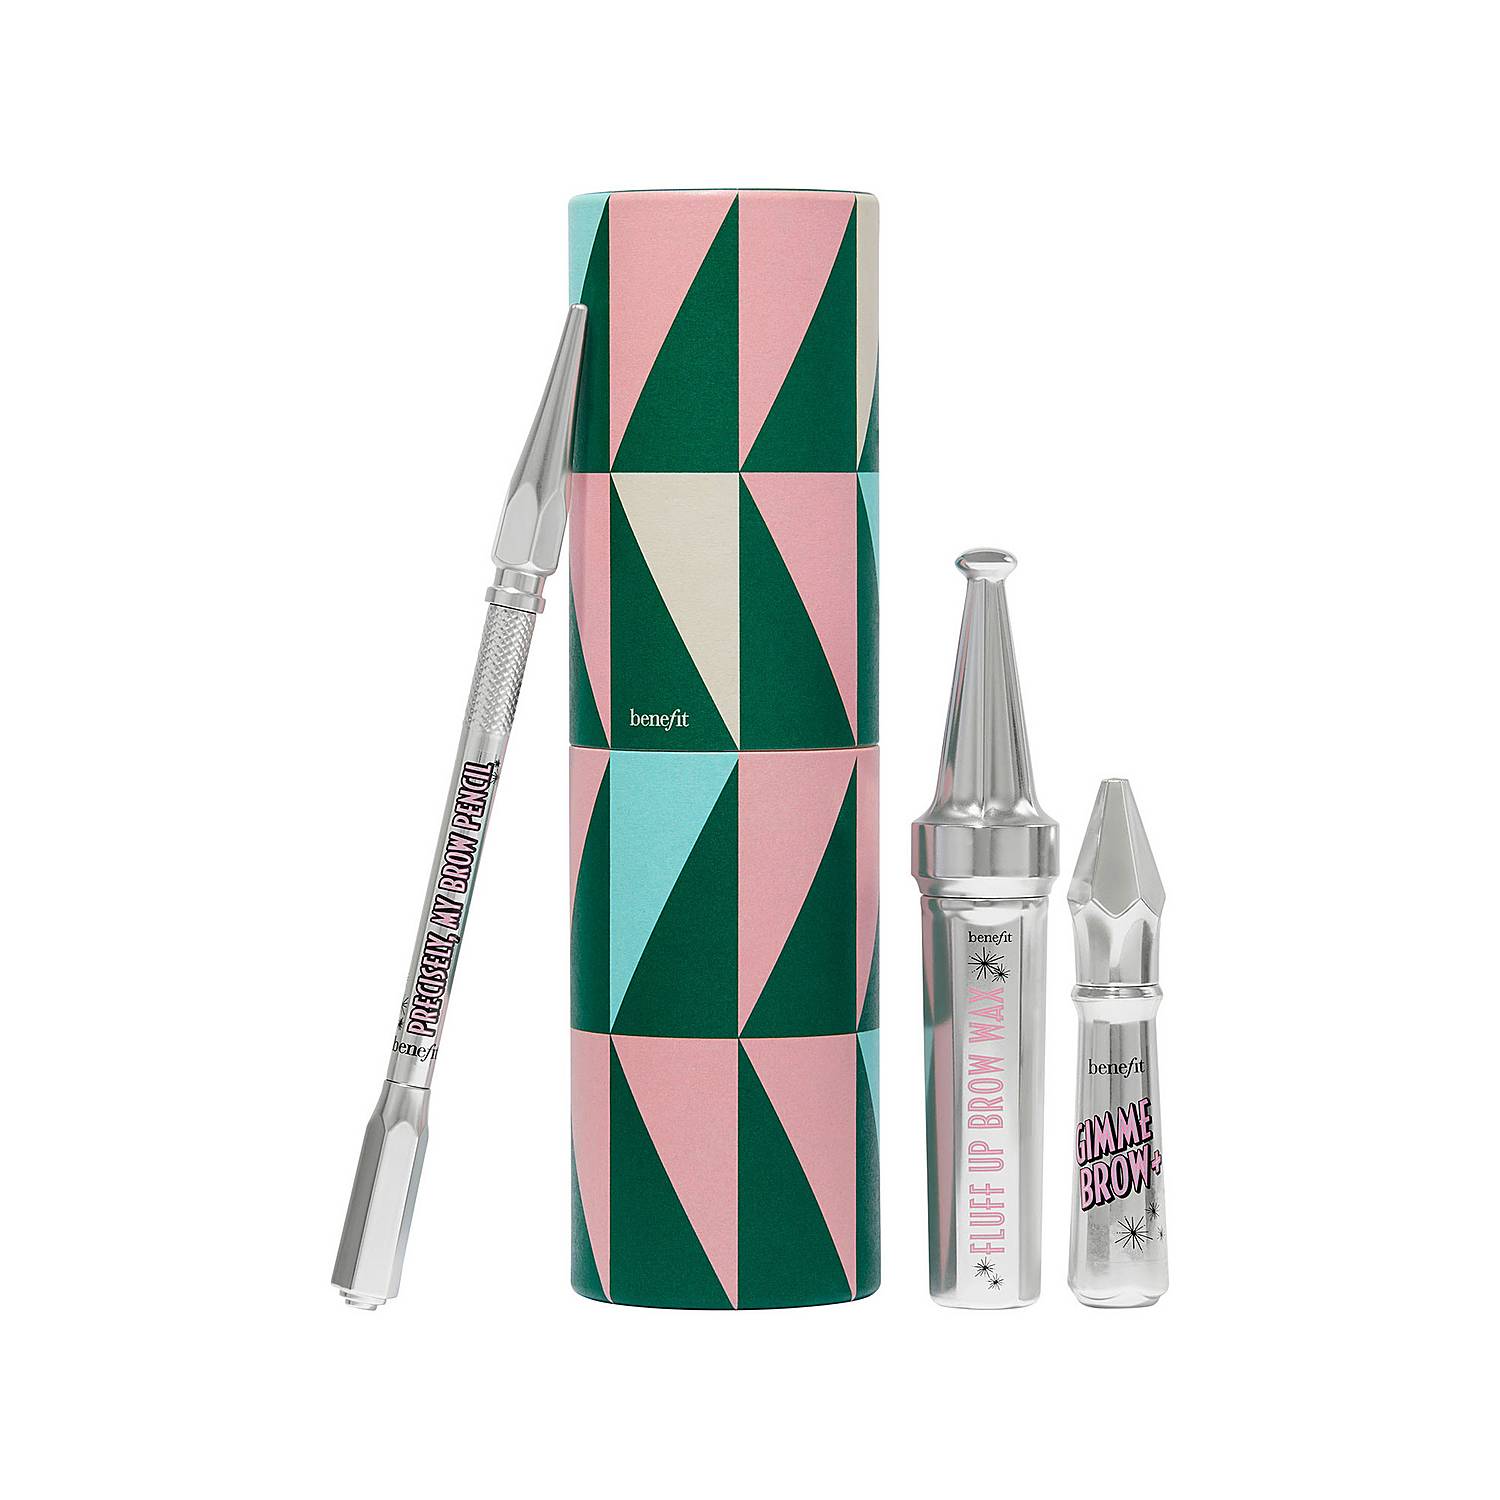 Benefit Fluffin' Festive Brows Brow Set